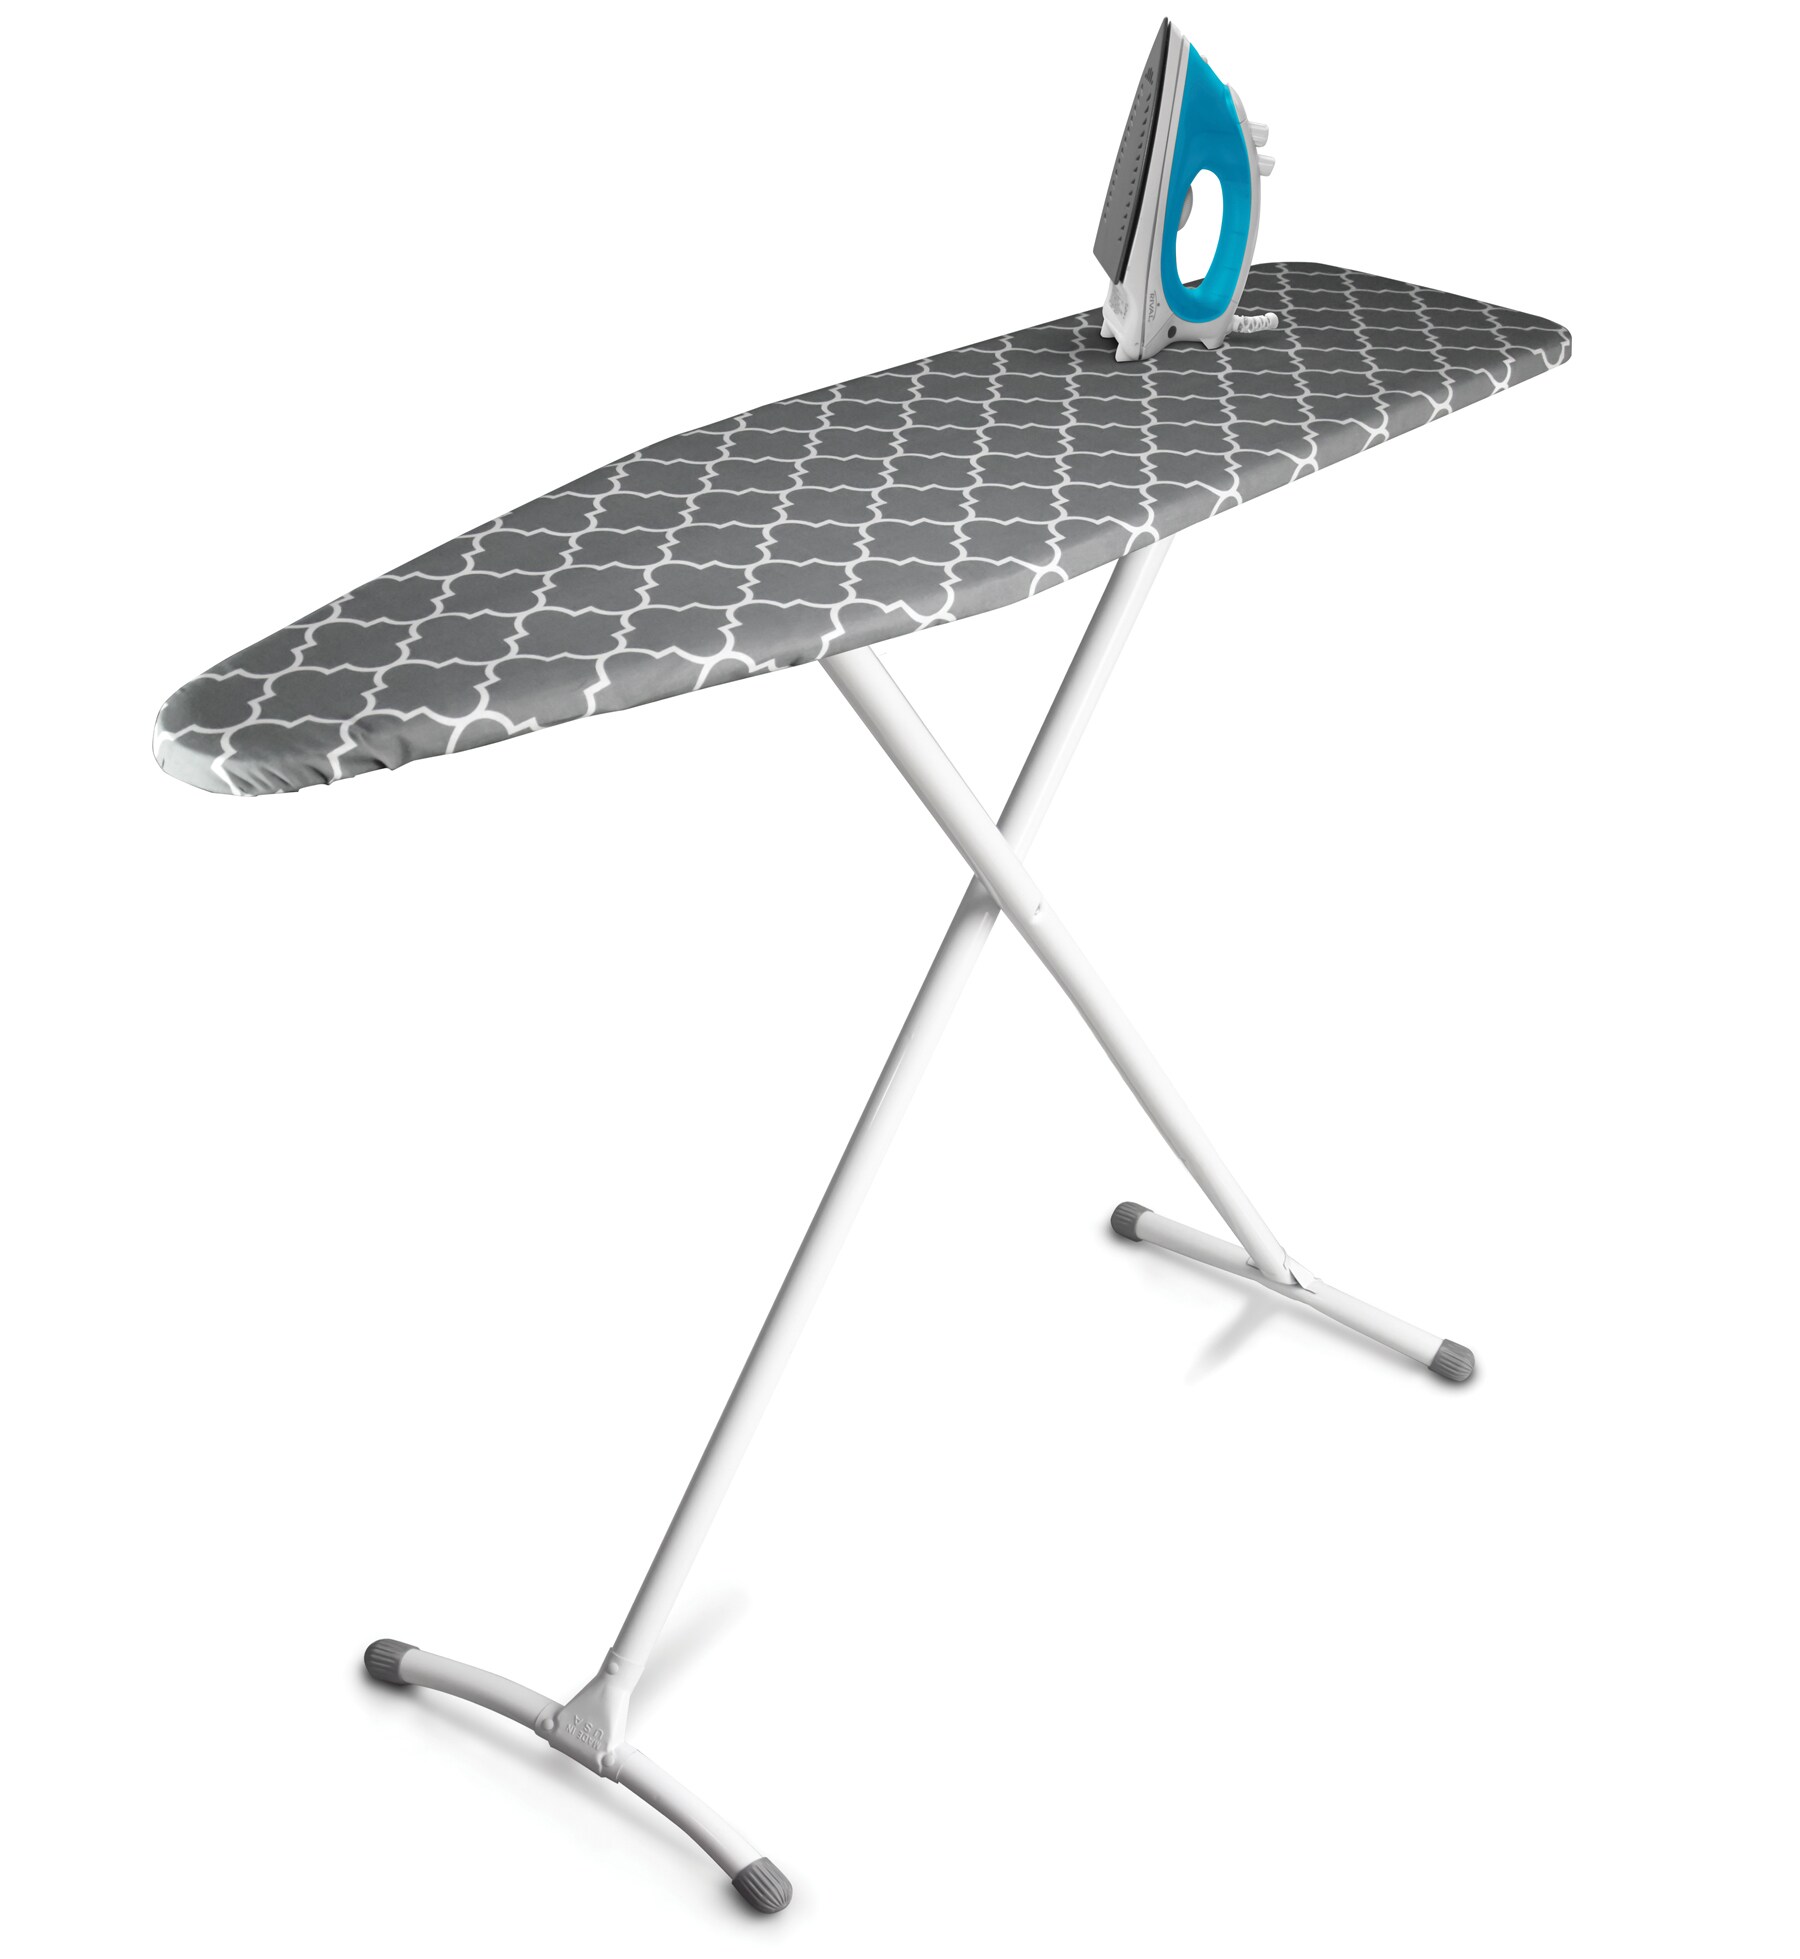 Homz Ironing Board T-leg Folding Pressing Table Height Adjustable Charcoal Grey for sale online 